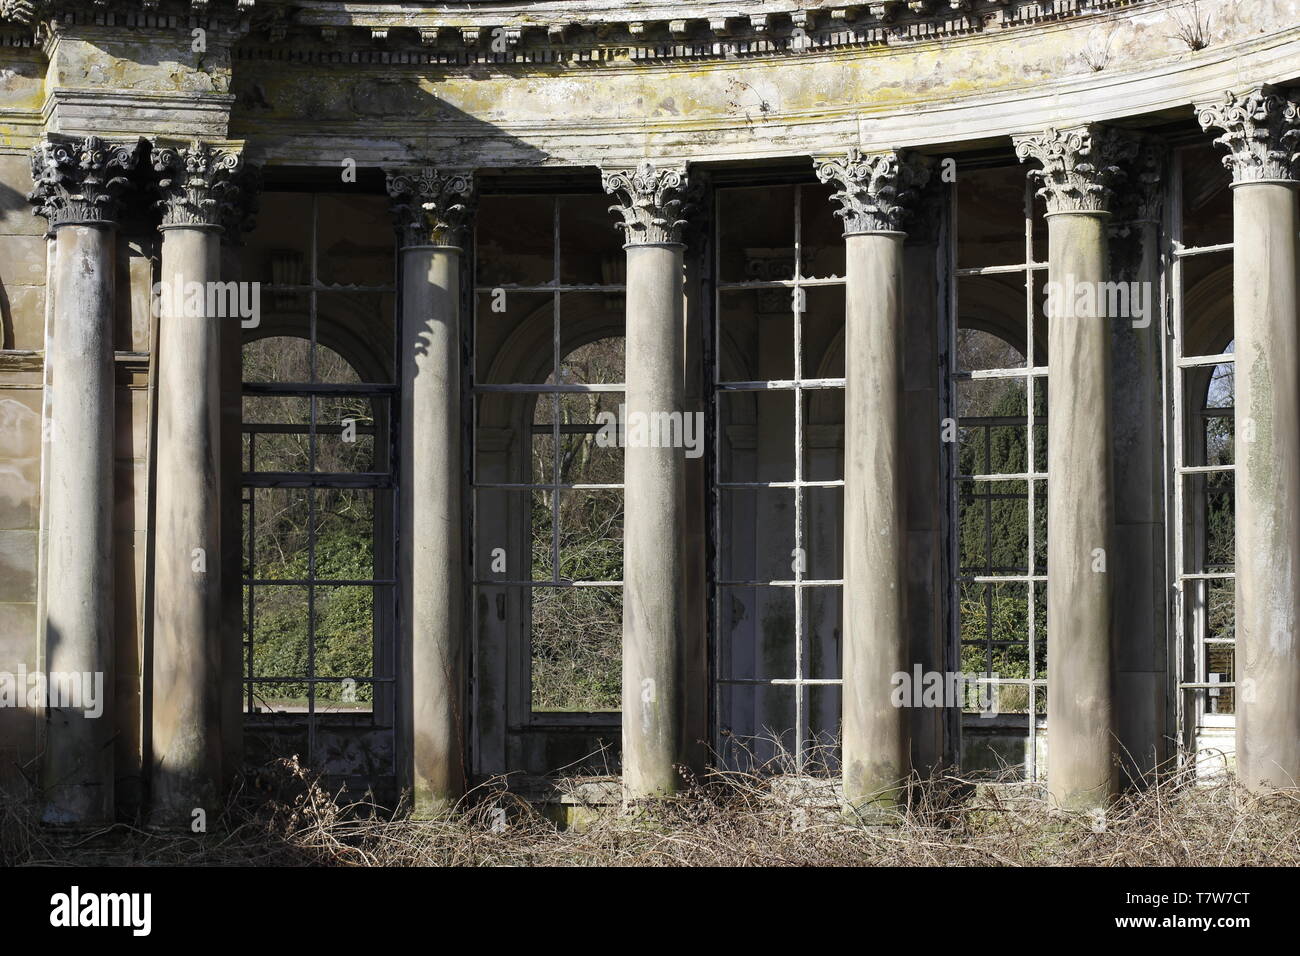 colour images showing detail of abandoned classic buildings including window frames, stone columns, decoration etc Stock Photo